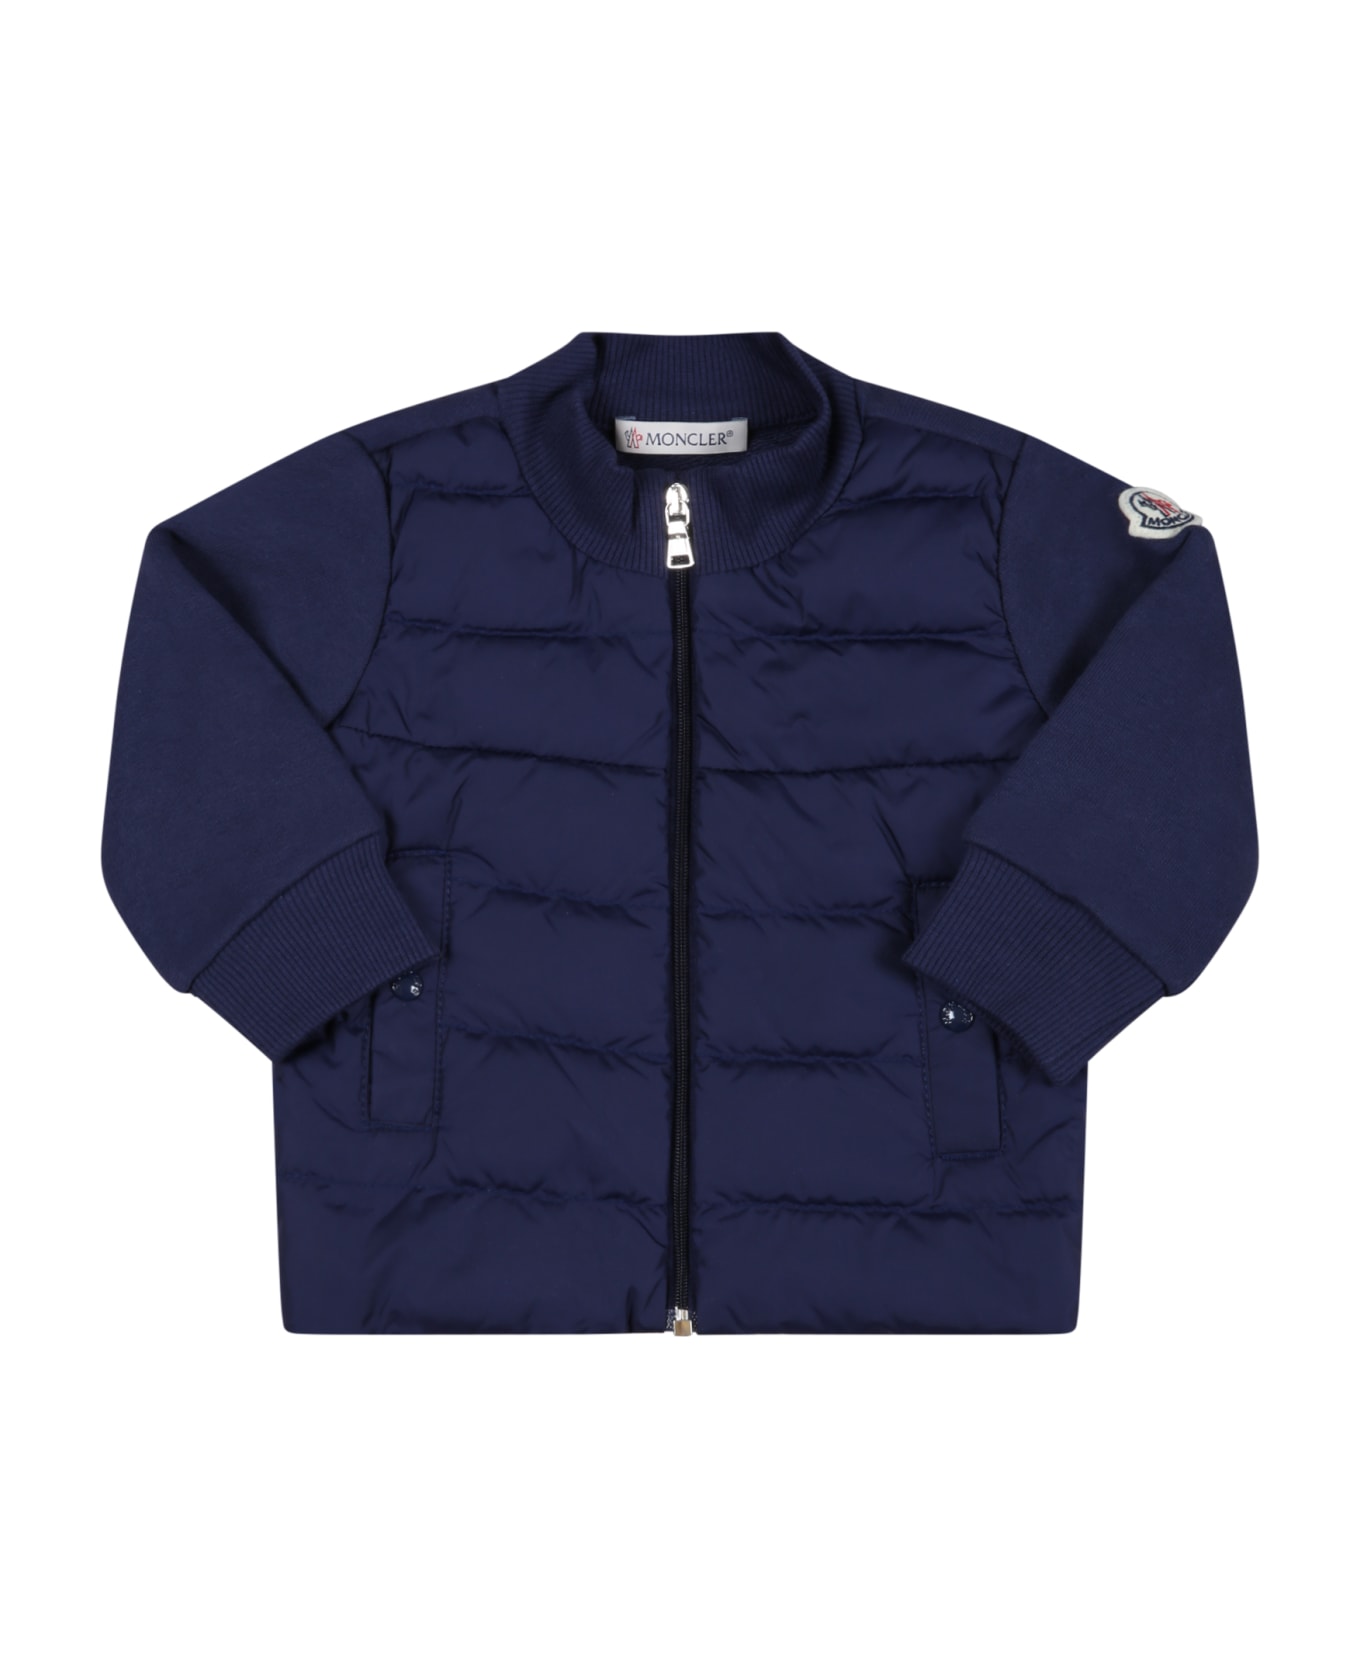 Moncler Blue Sweatshirt For Baby Boy With Logo Patch - Blue